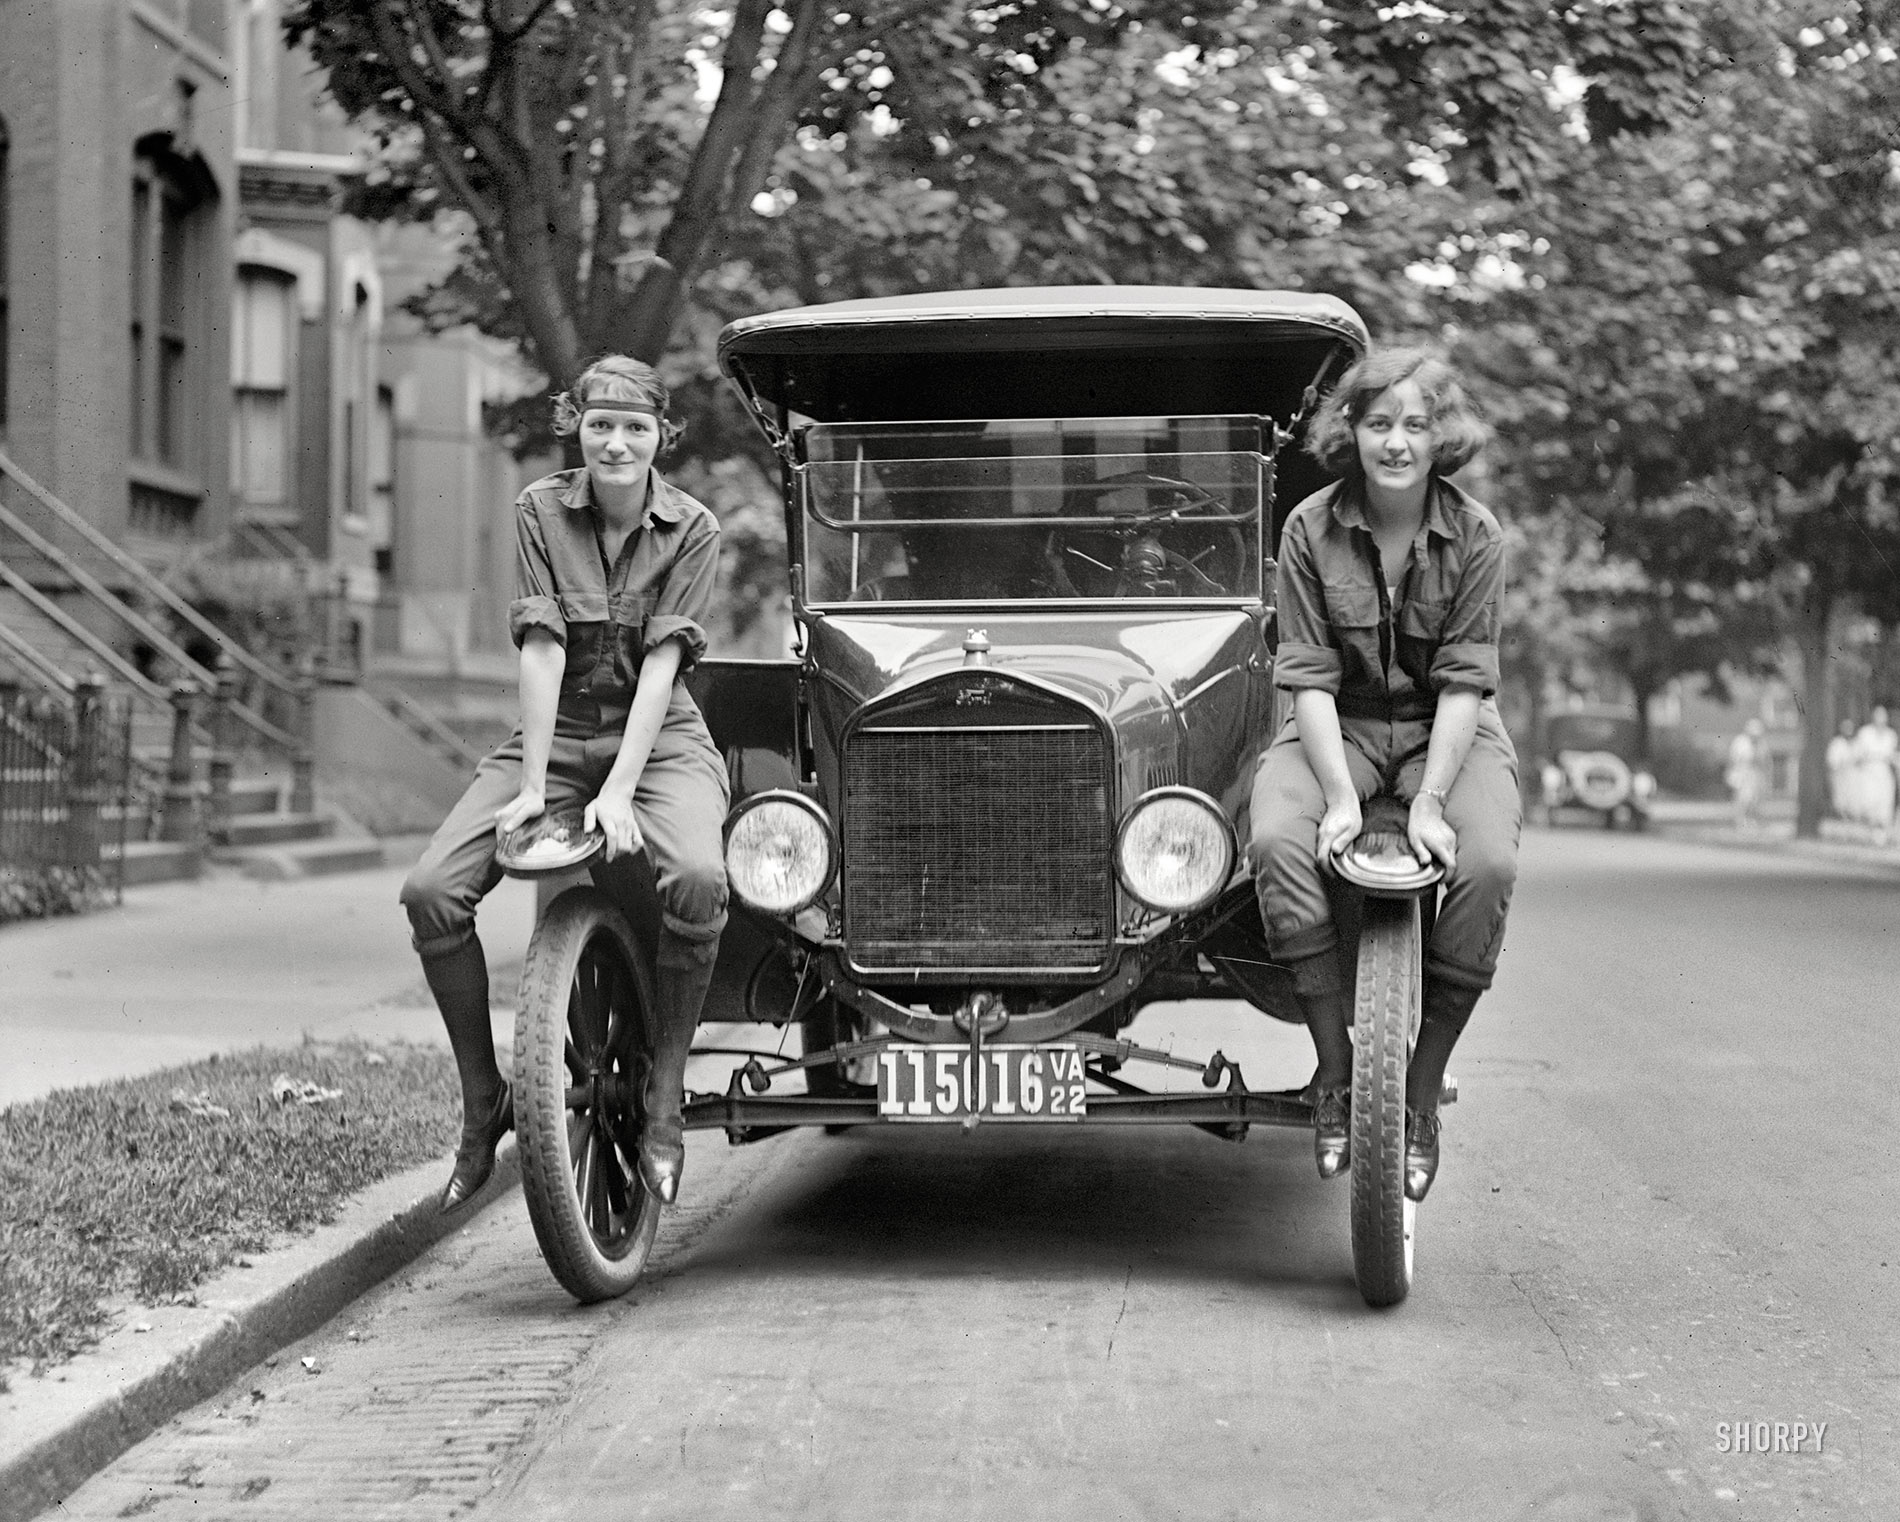 June 13, 1922. Washington, D.C. "Viola LaLonde and Elizabeth Van Tuyl." Our second glimpse of these Jazz-Age vagabonds. National Photo. View full size.